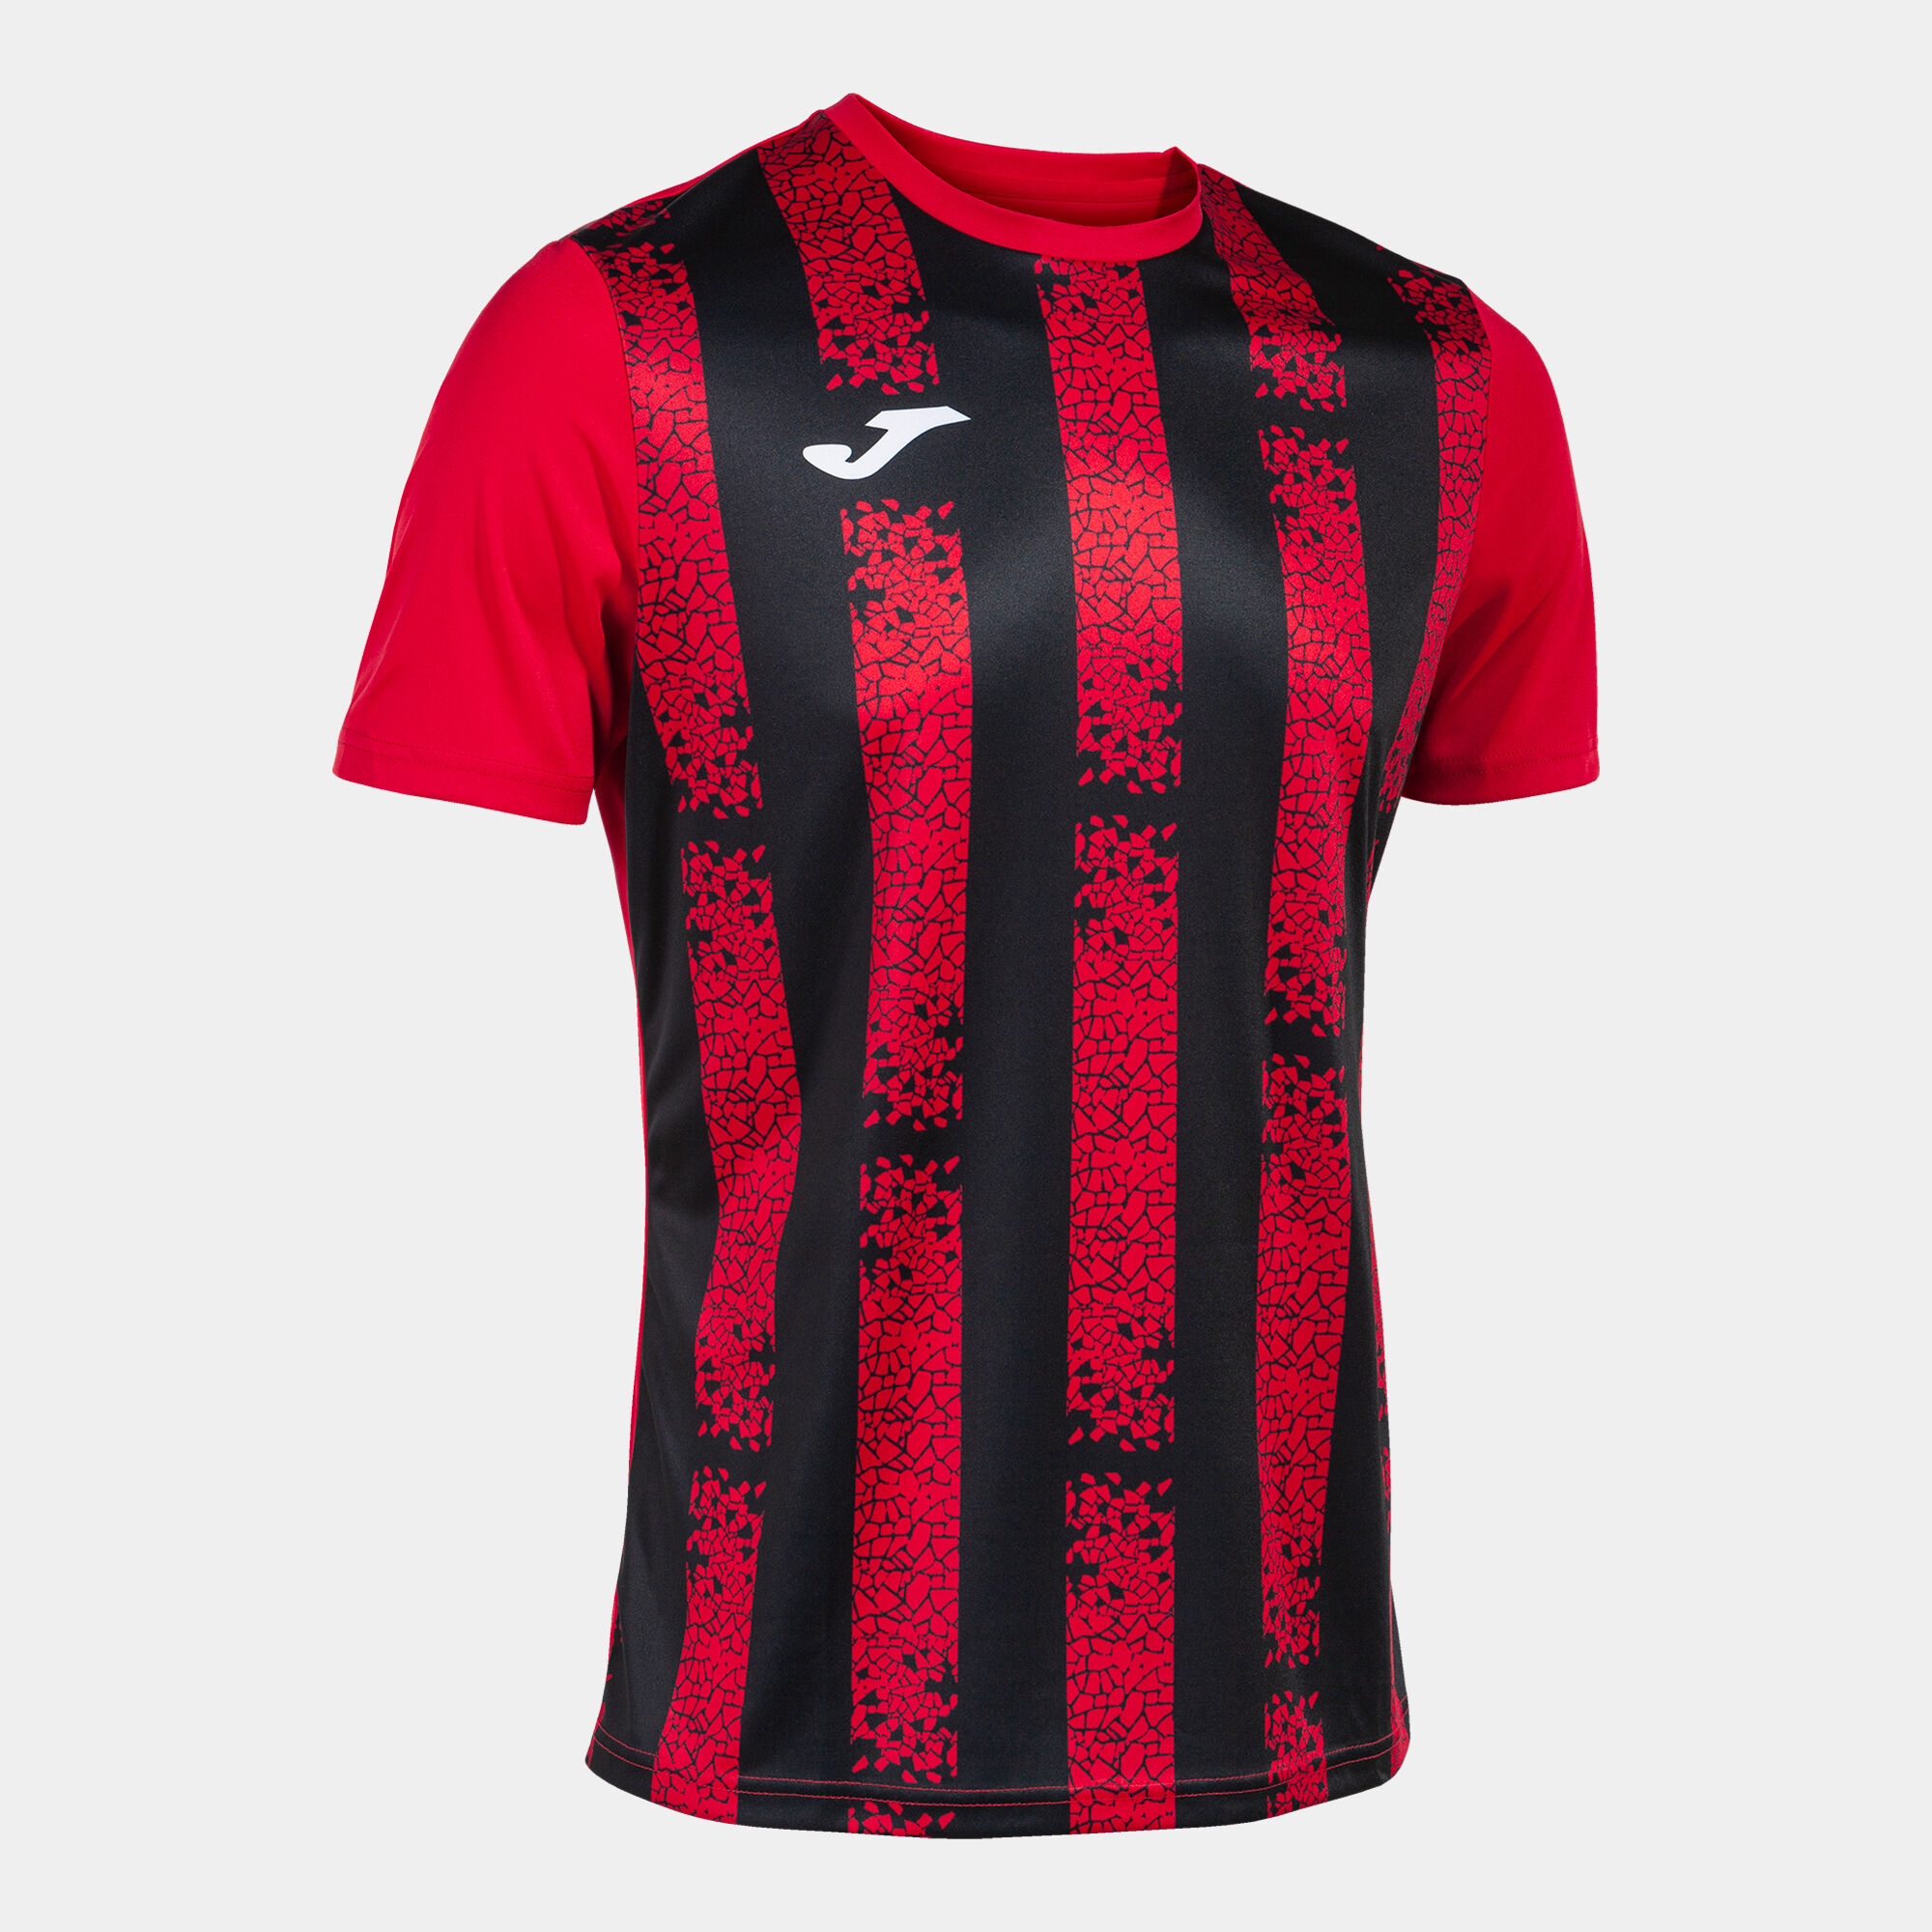 Maillot manches courtes homme Inter III rouge noir